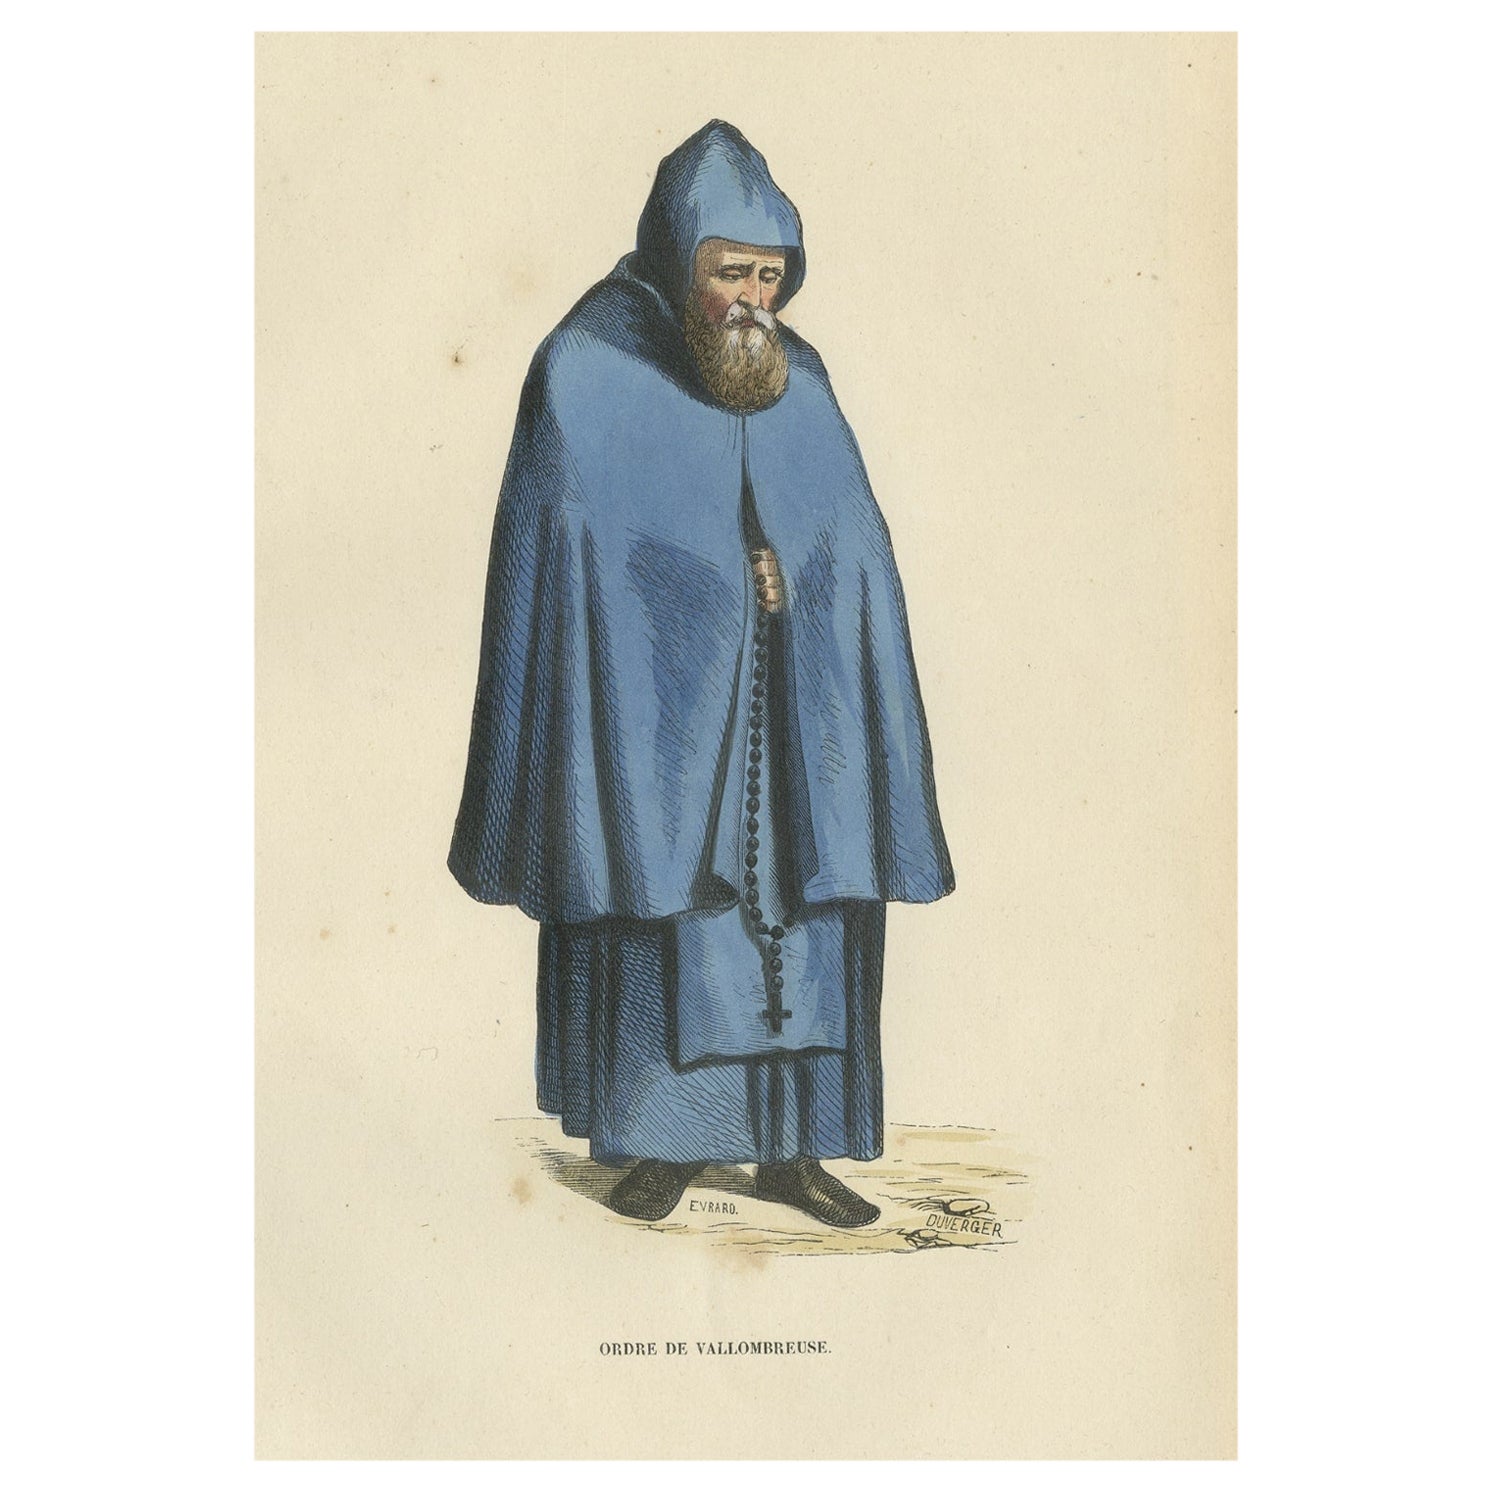 Old Print of a Vallombrosian, a Monastic Religious Order in the Catholic Church